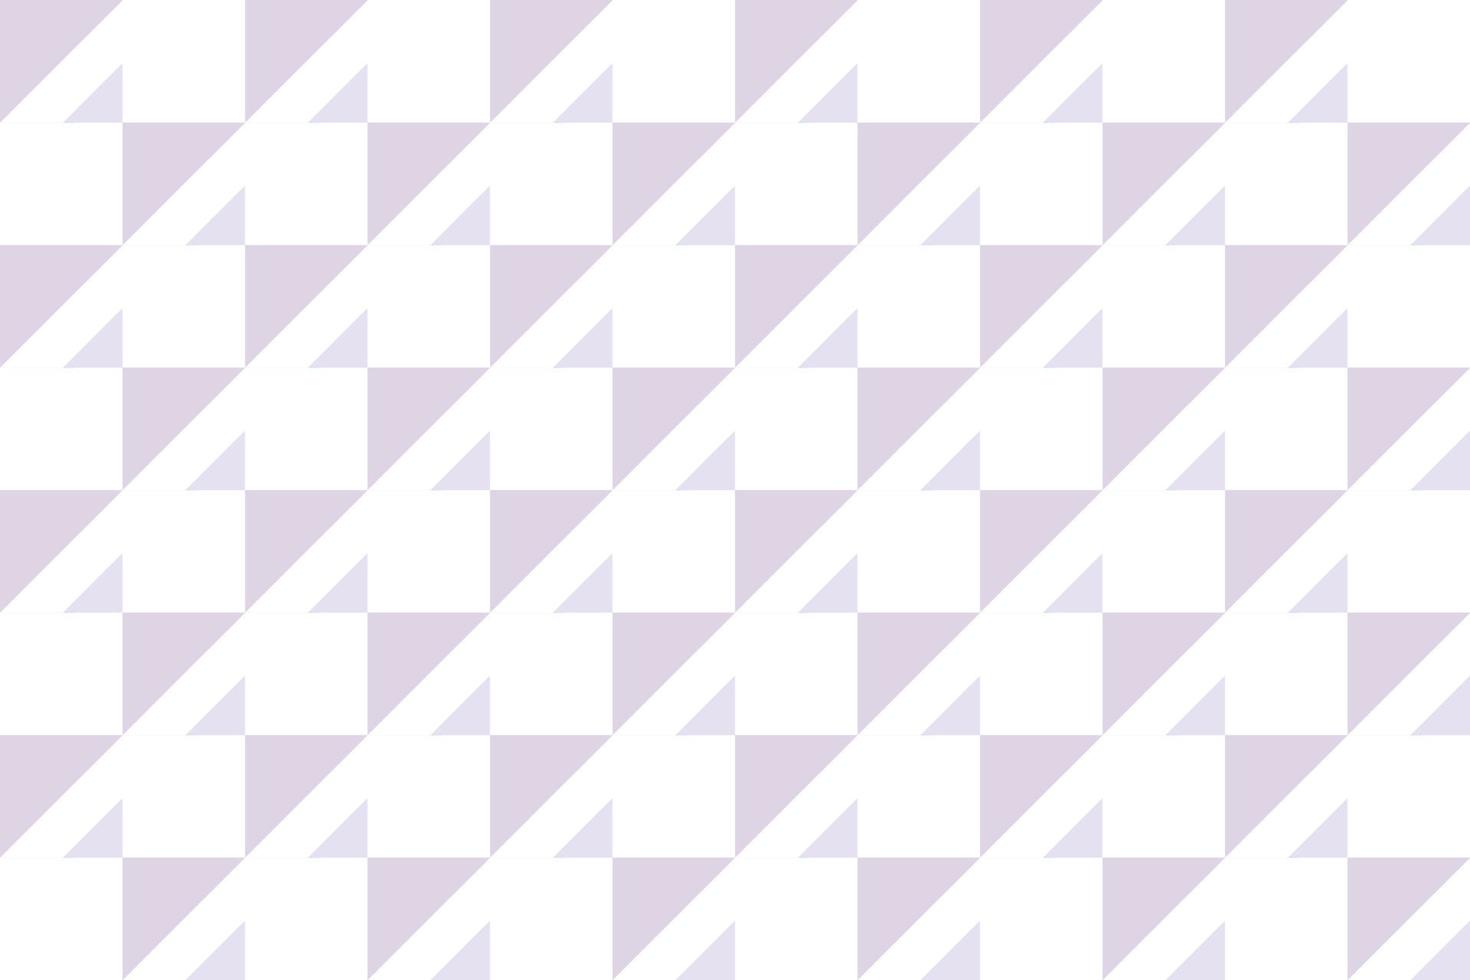 Checker Pattern Illustrations Vectors is a pattern of modified stripes consisting of crossed horizontal and vertical lines which form squares.